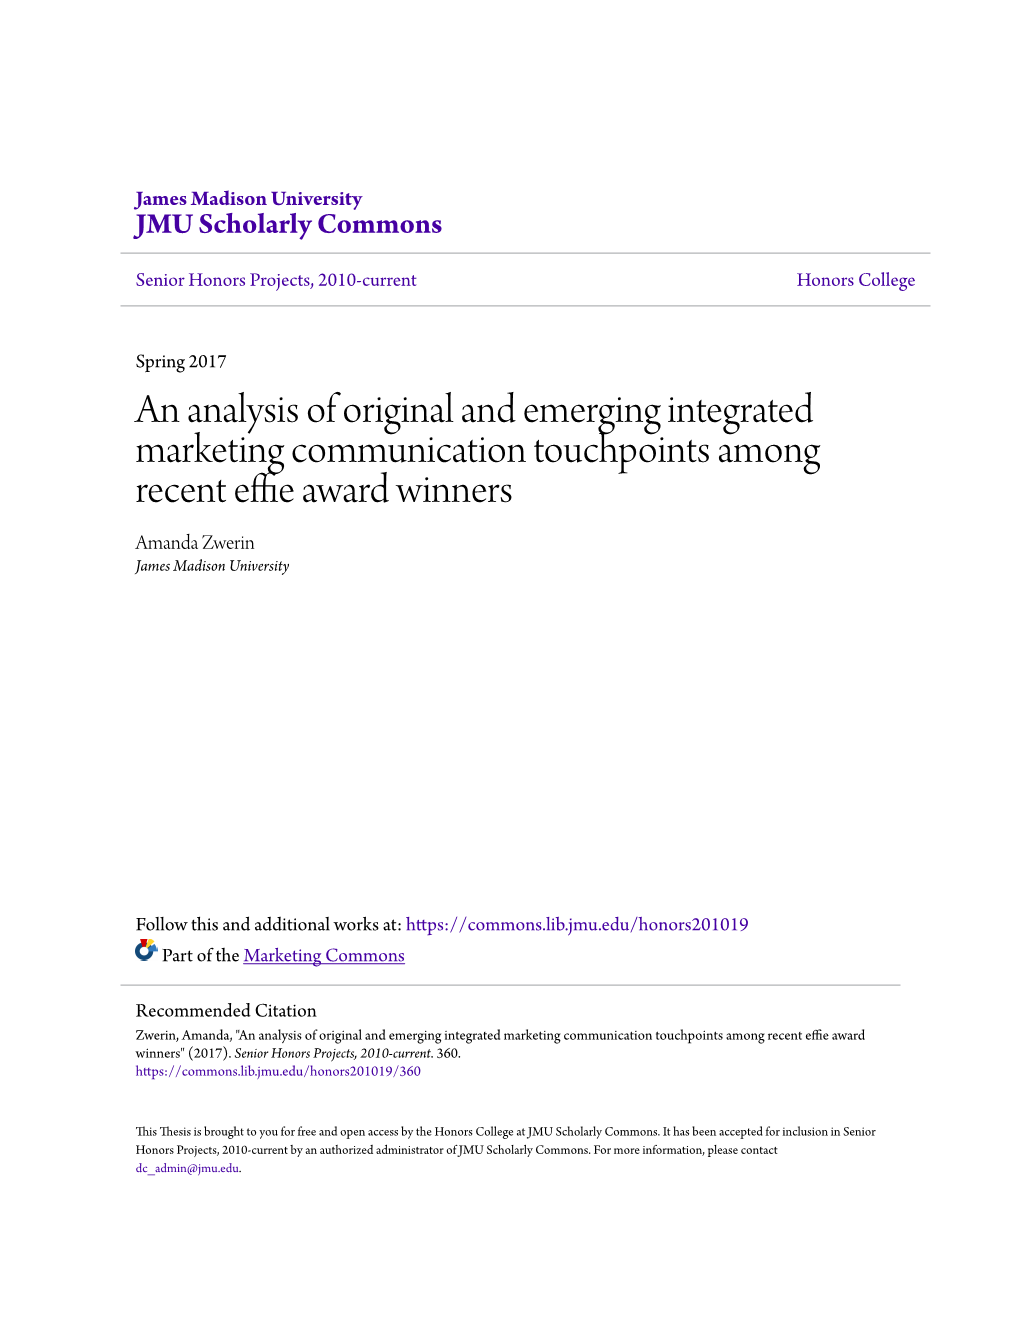 An Analysis of Original and Emerging Integrated Marketing Communication Touchpoints Among Recent Effiew a Ard Winners Amanda Zwerin James Madison University